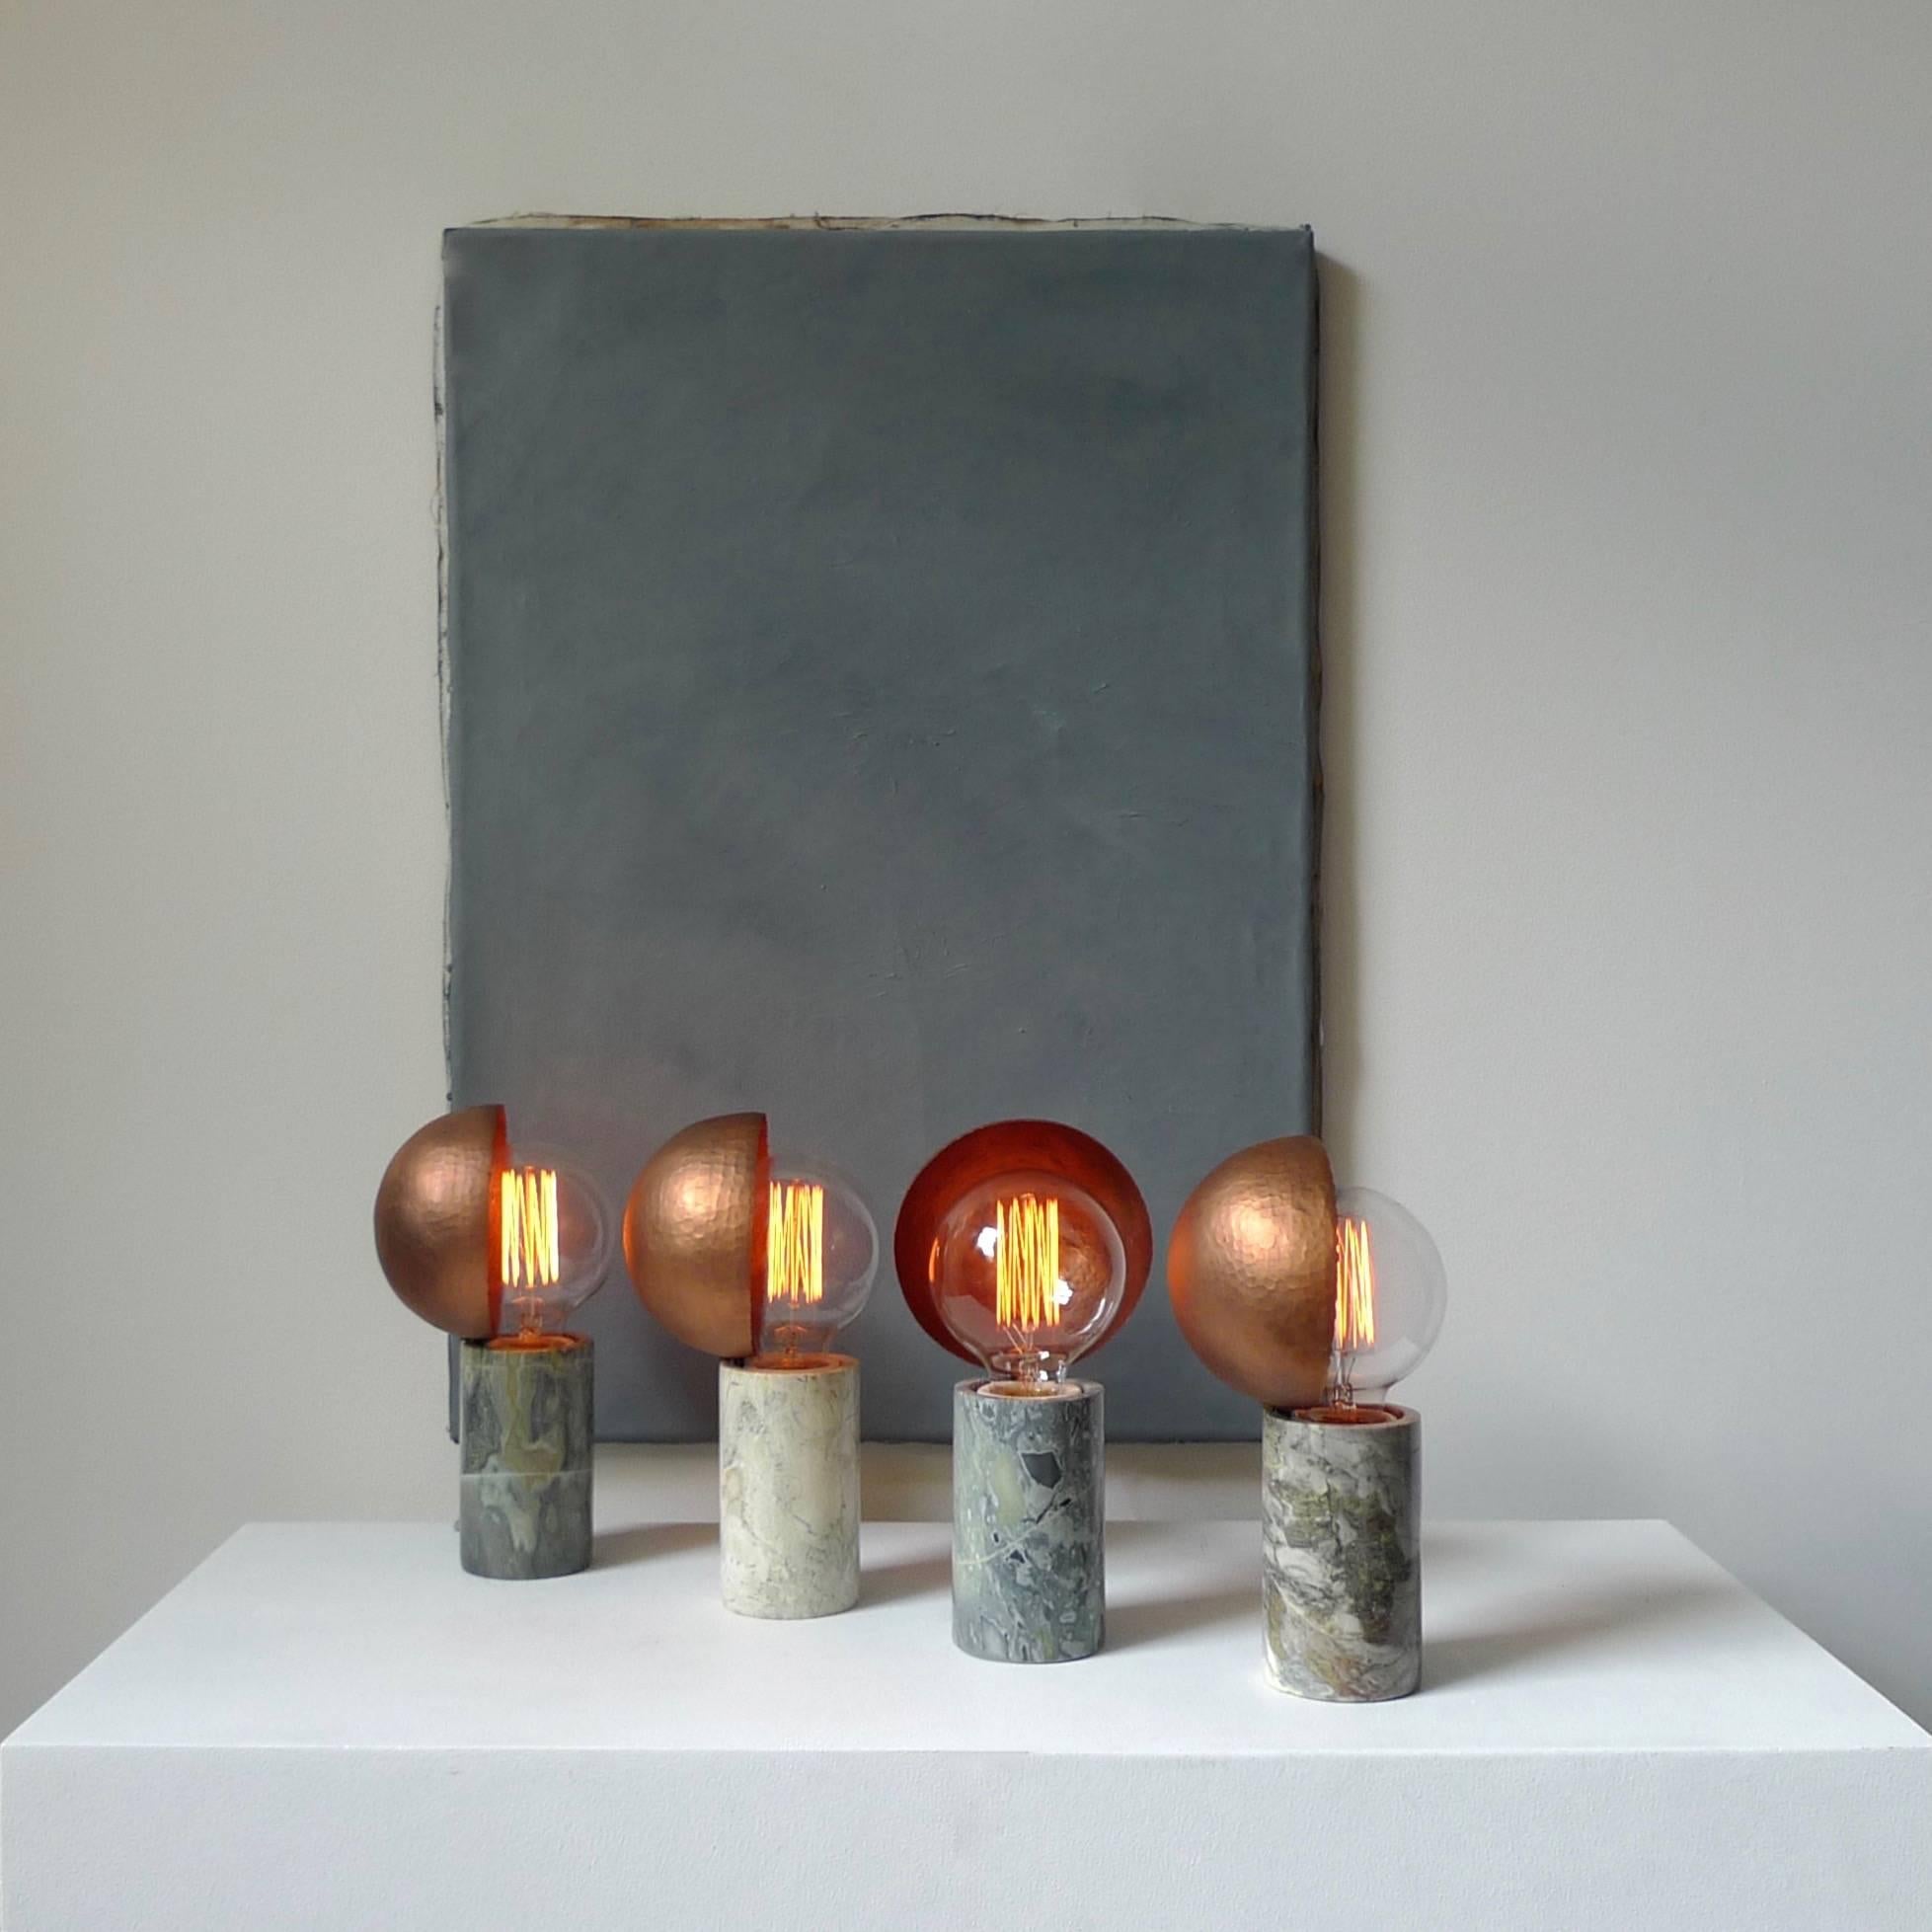 Marble table lamps, Sander Bottinga
Base in different kinds of marble
Hand-hammered copper shade movable around light source
A dimmer inlaid with leather
Dimensions: H 24 x W 12 x D 11 cm
The design artwork is meticulously handcrafted in a limited